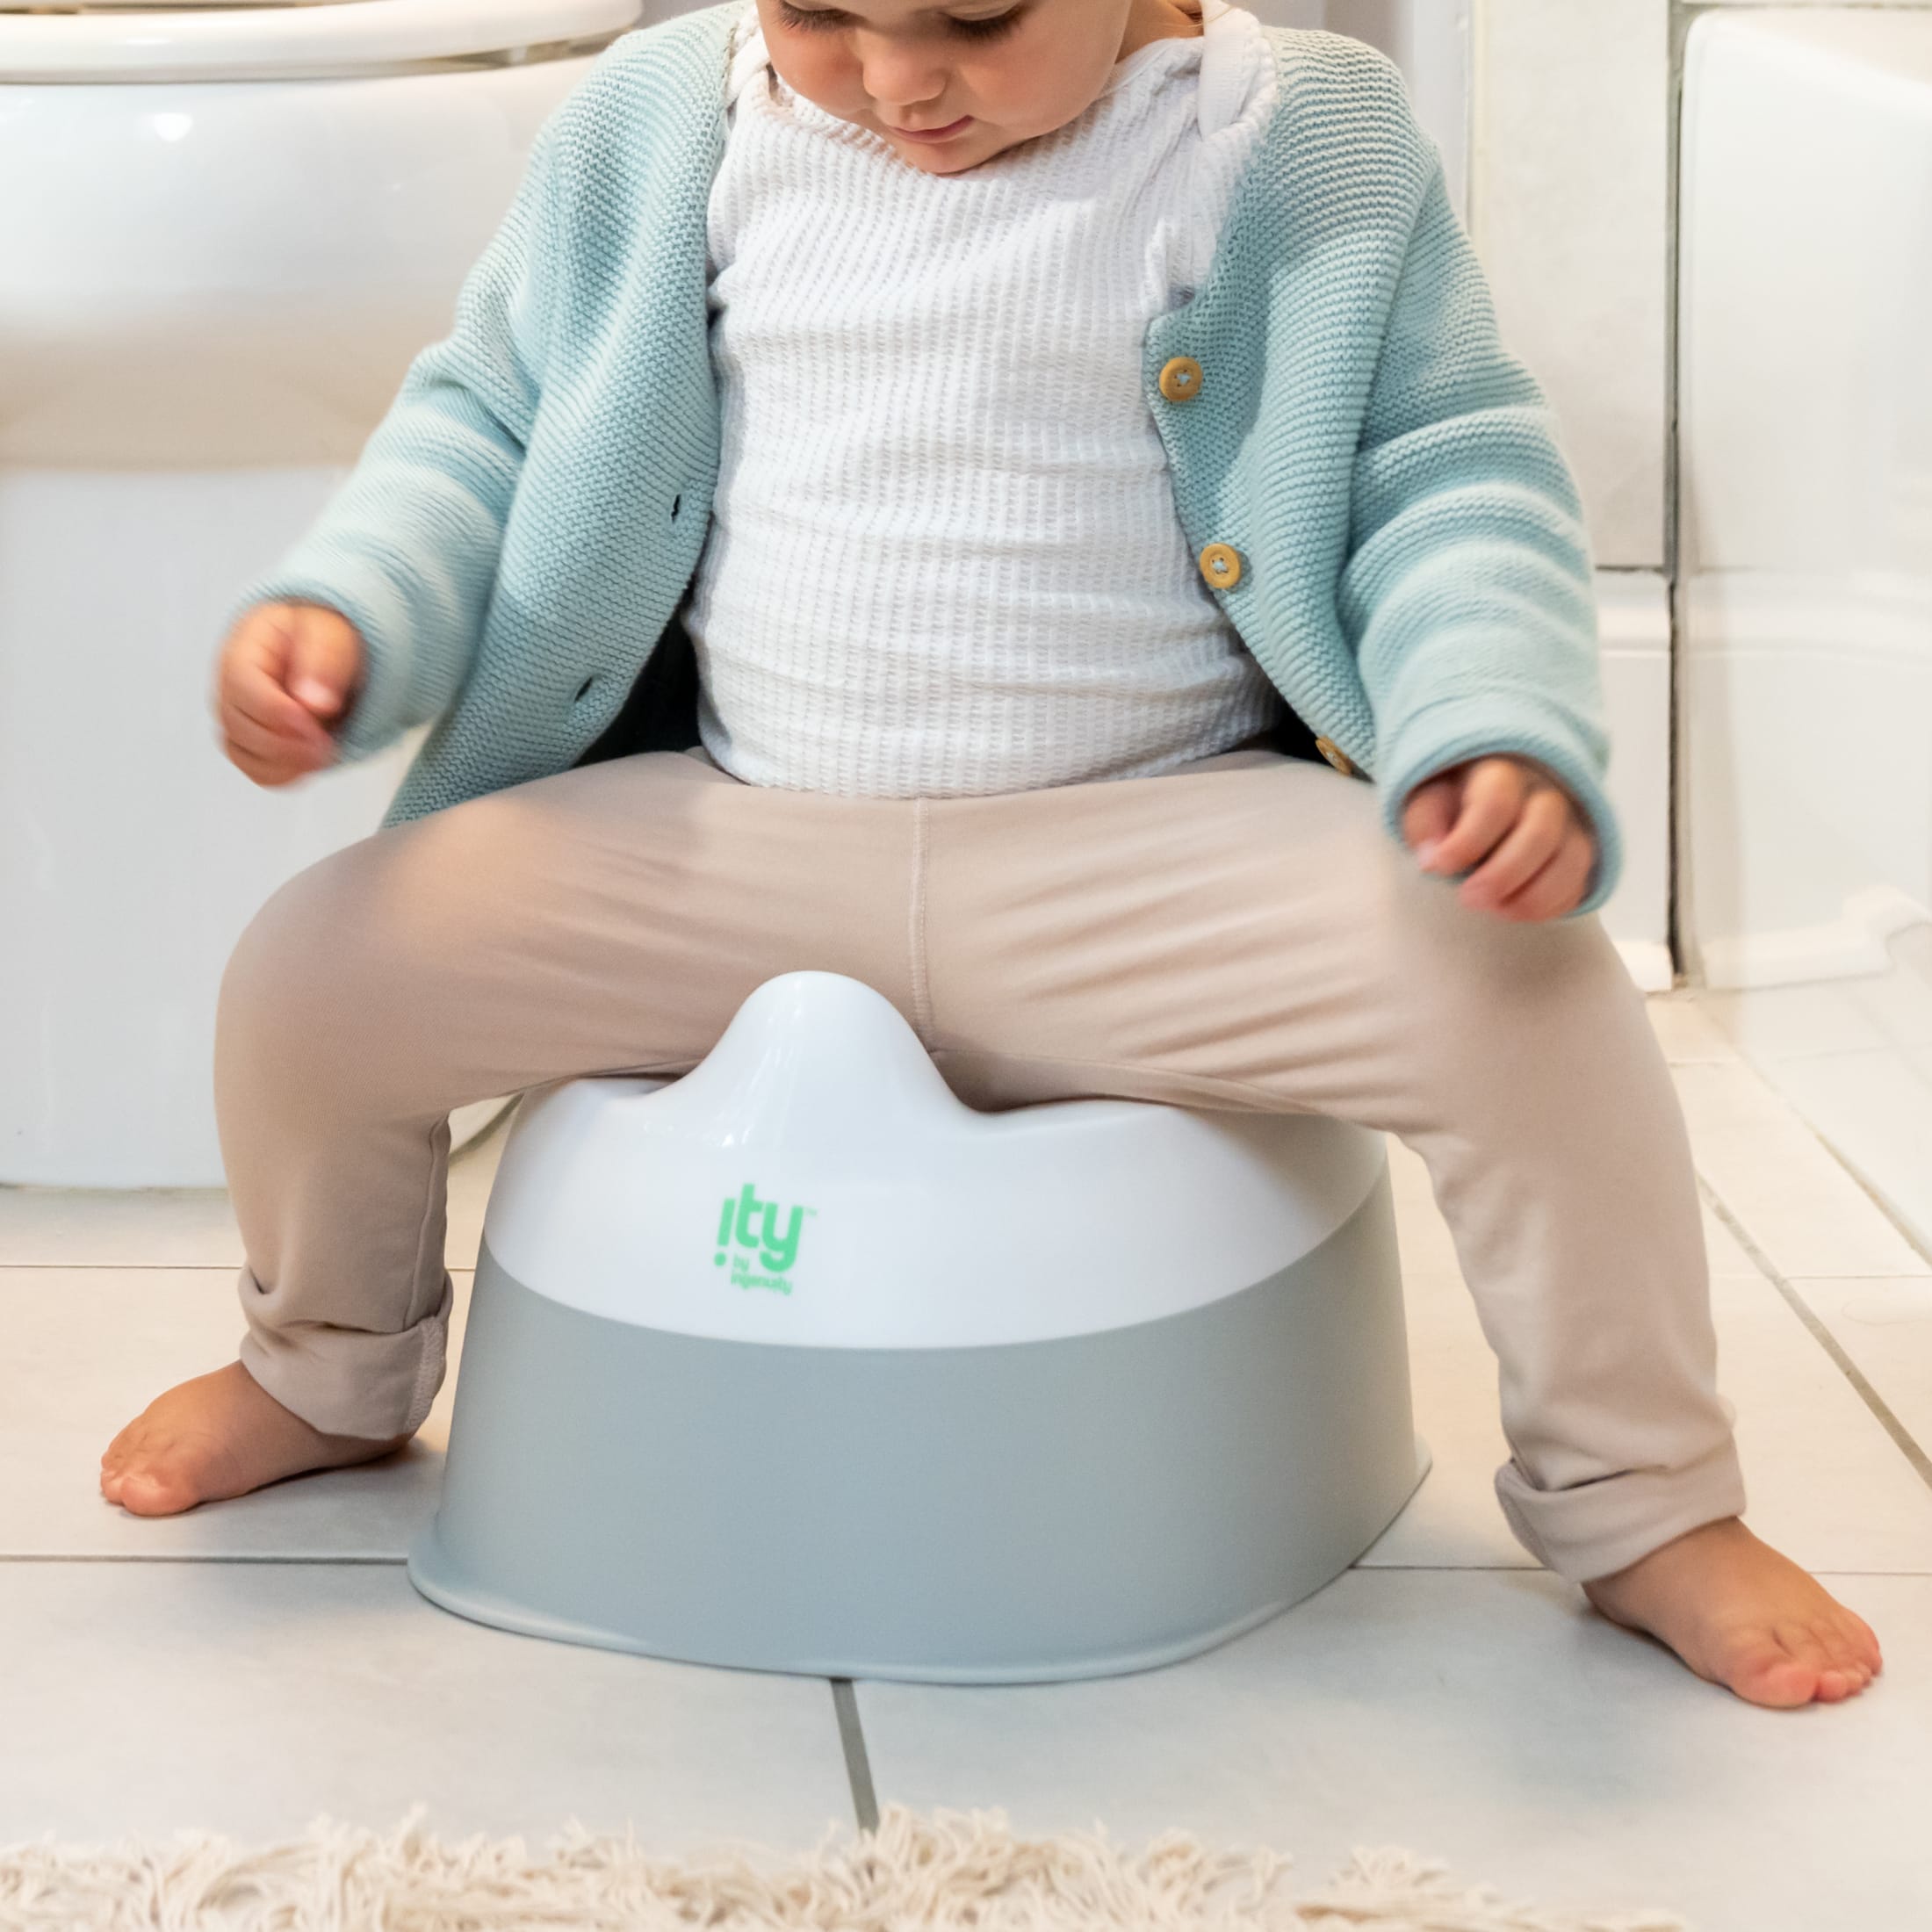 ITY by Ingenuity Ready Set Go Toddler Potty, White - image 4 of 14